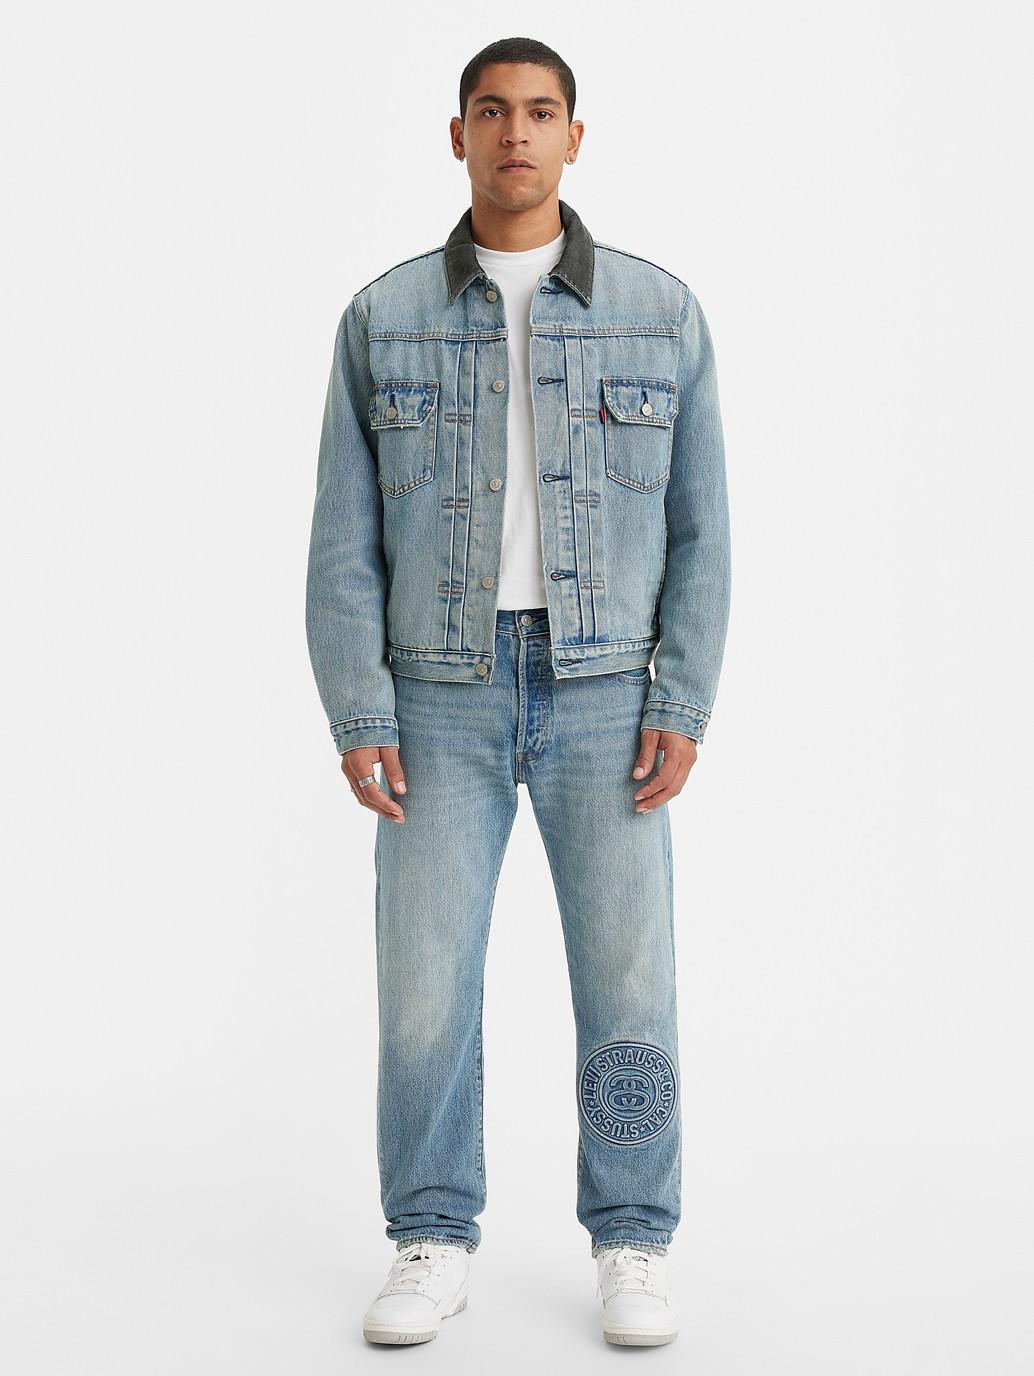 Buy Stüssy & Levi's® Embossed 501® Jeans | Levi's® Official Online Store SG